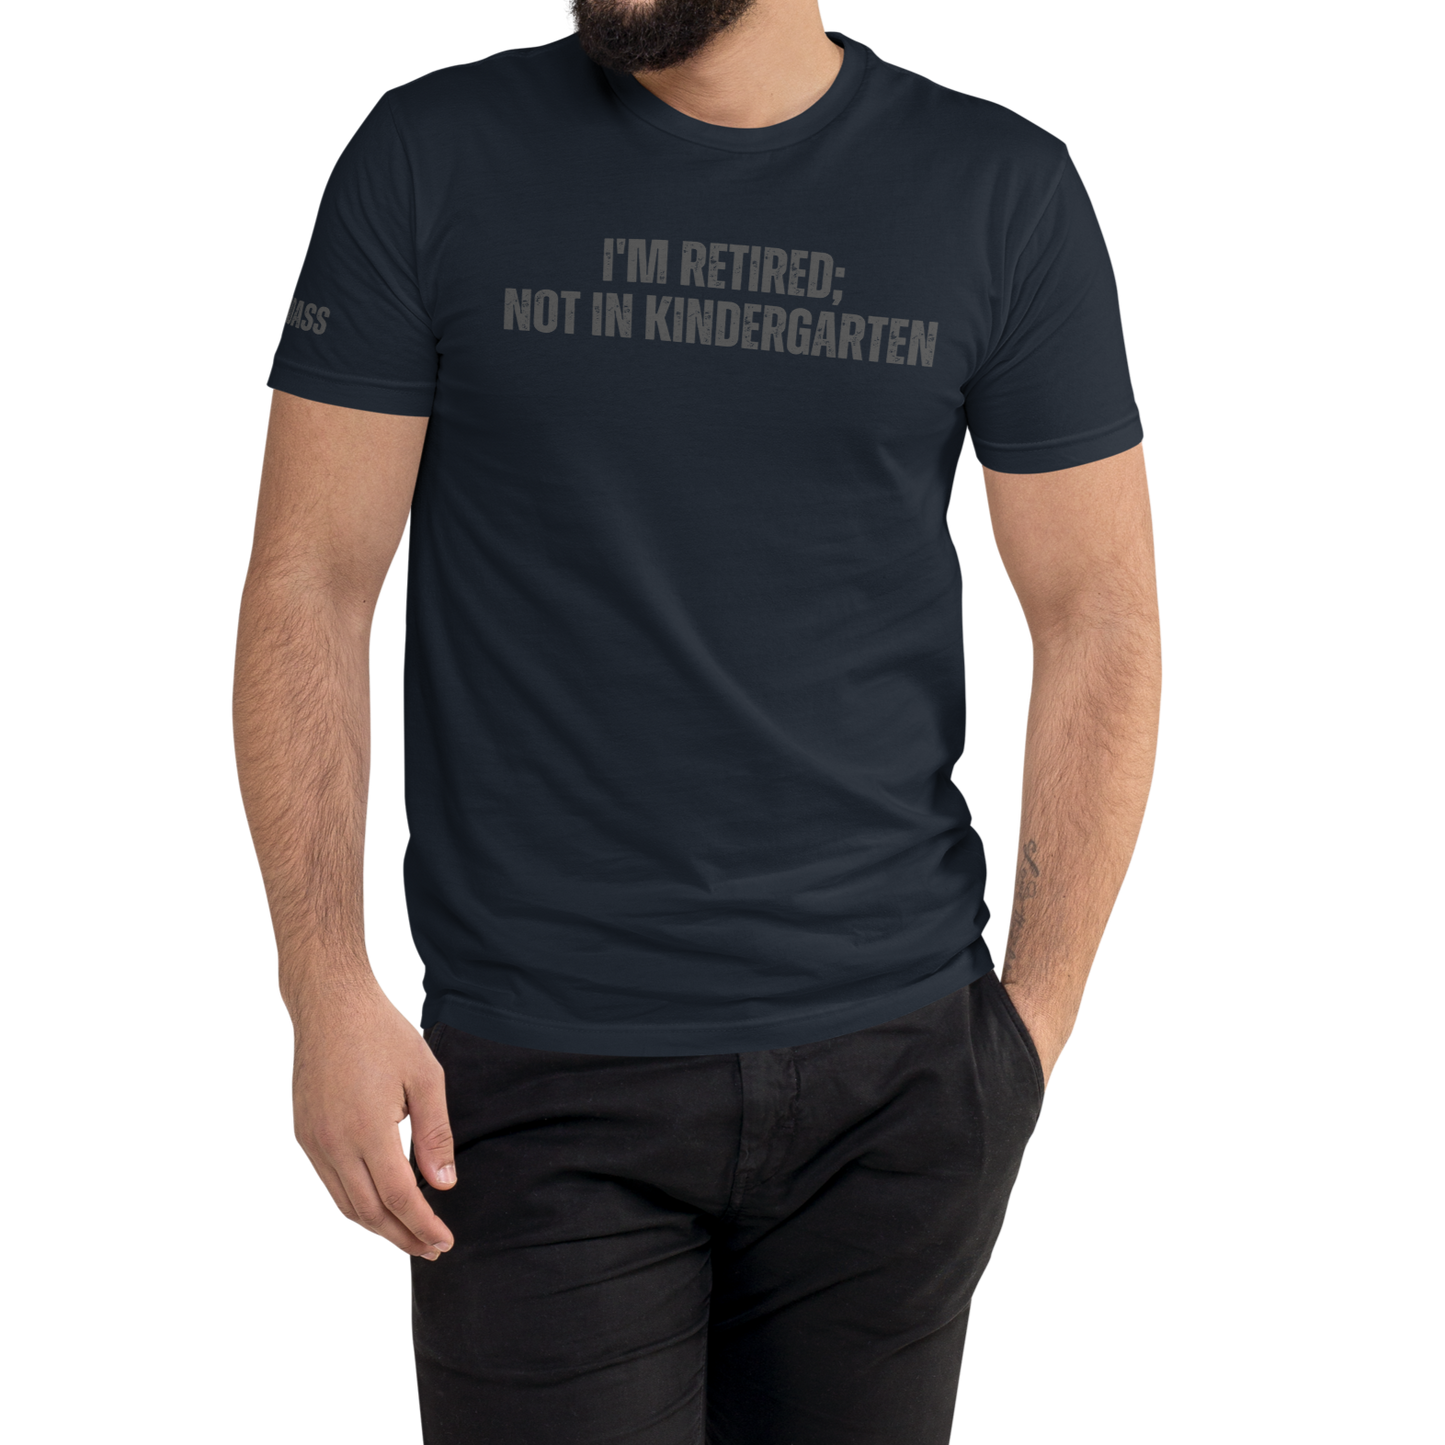 I'm Retired; Not in Kindergarten Fitted Shirt